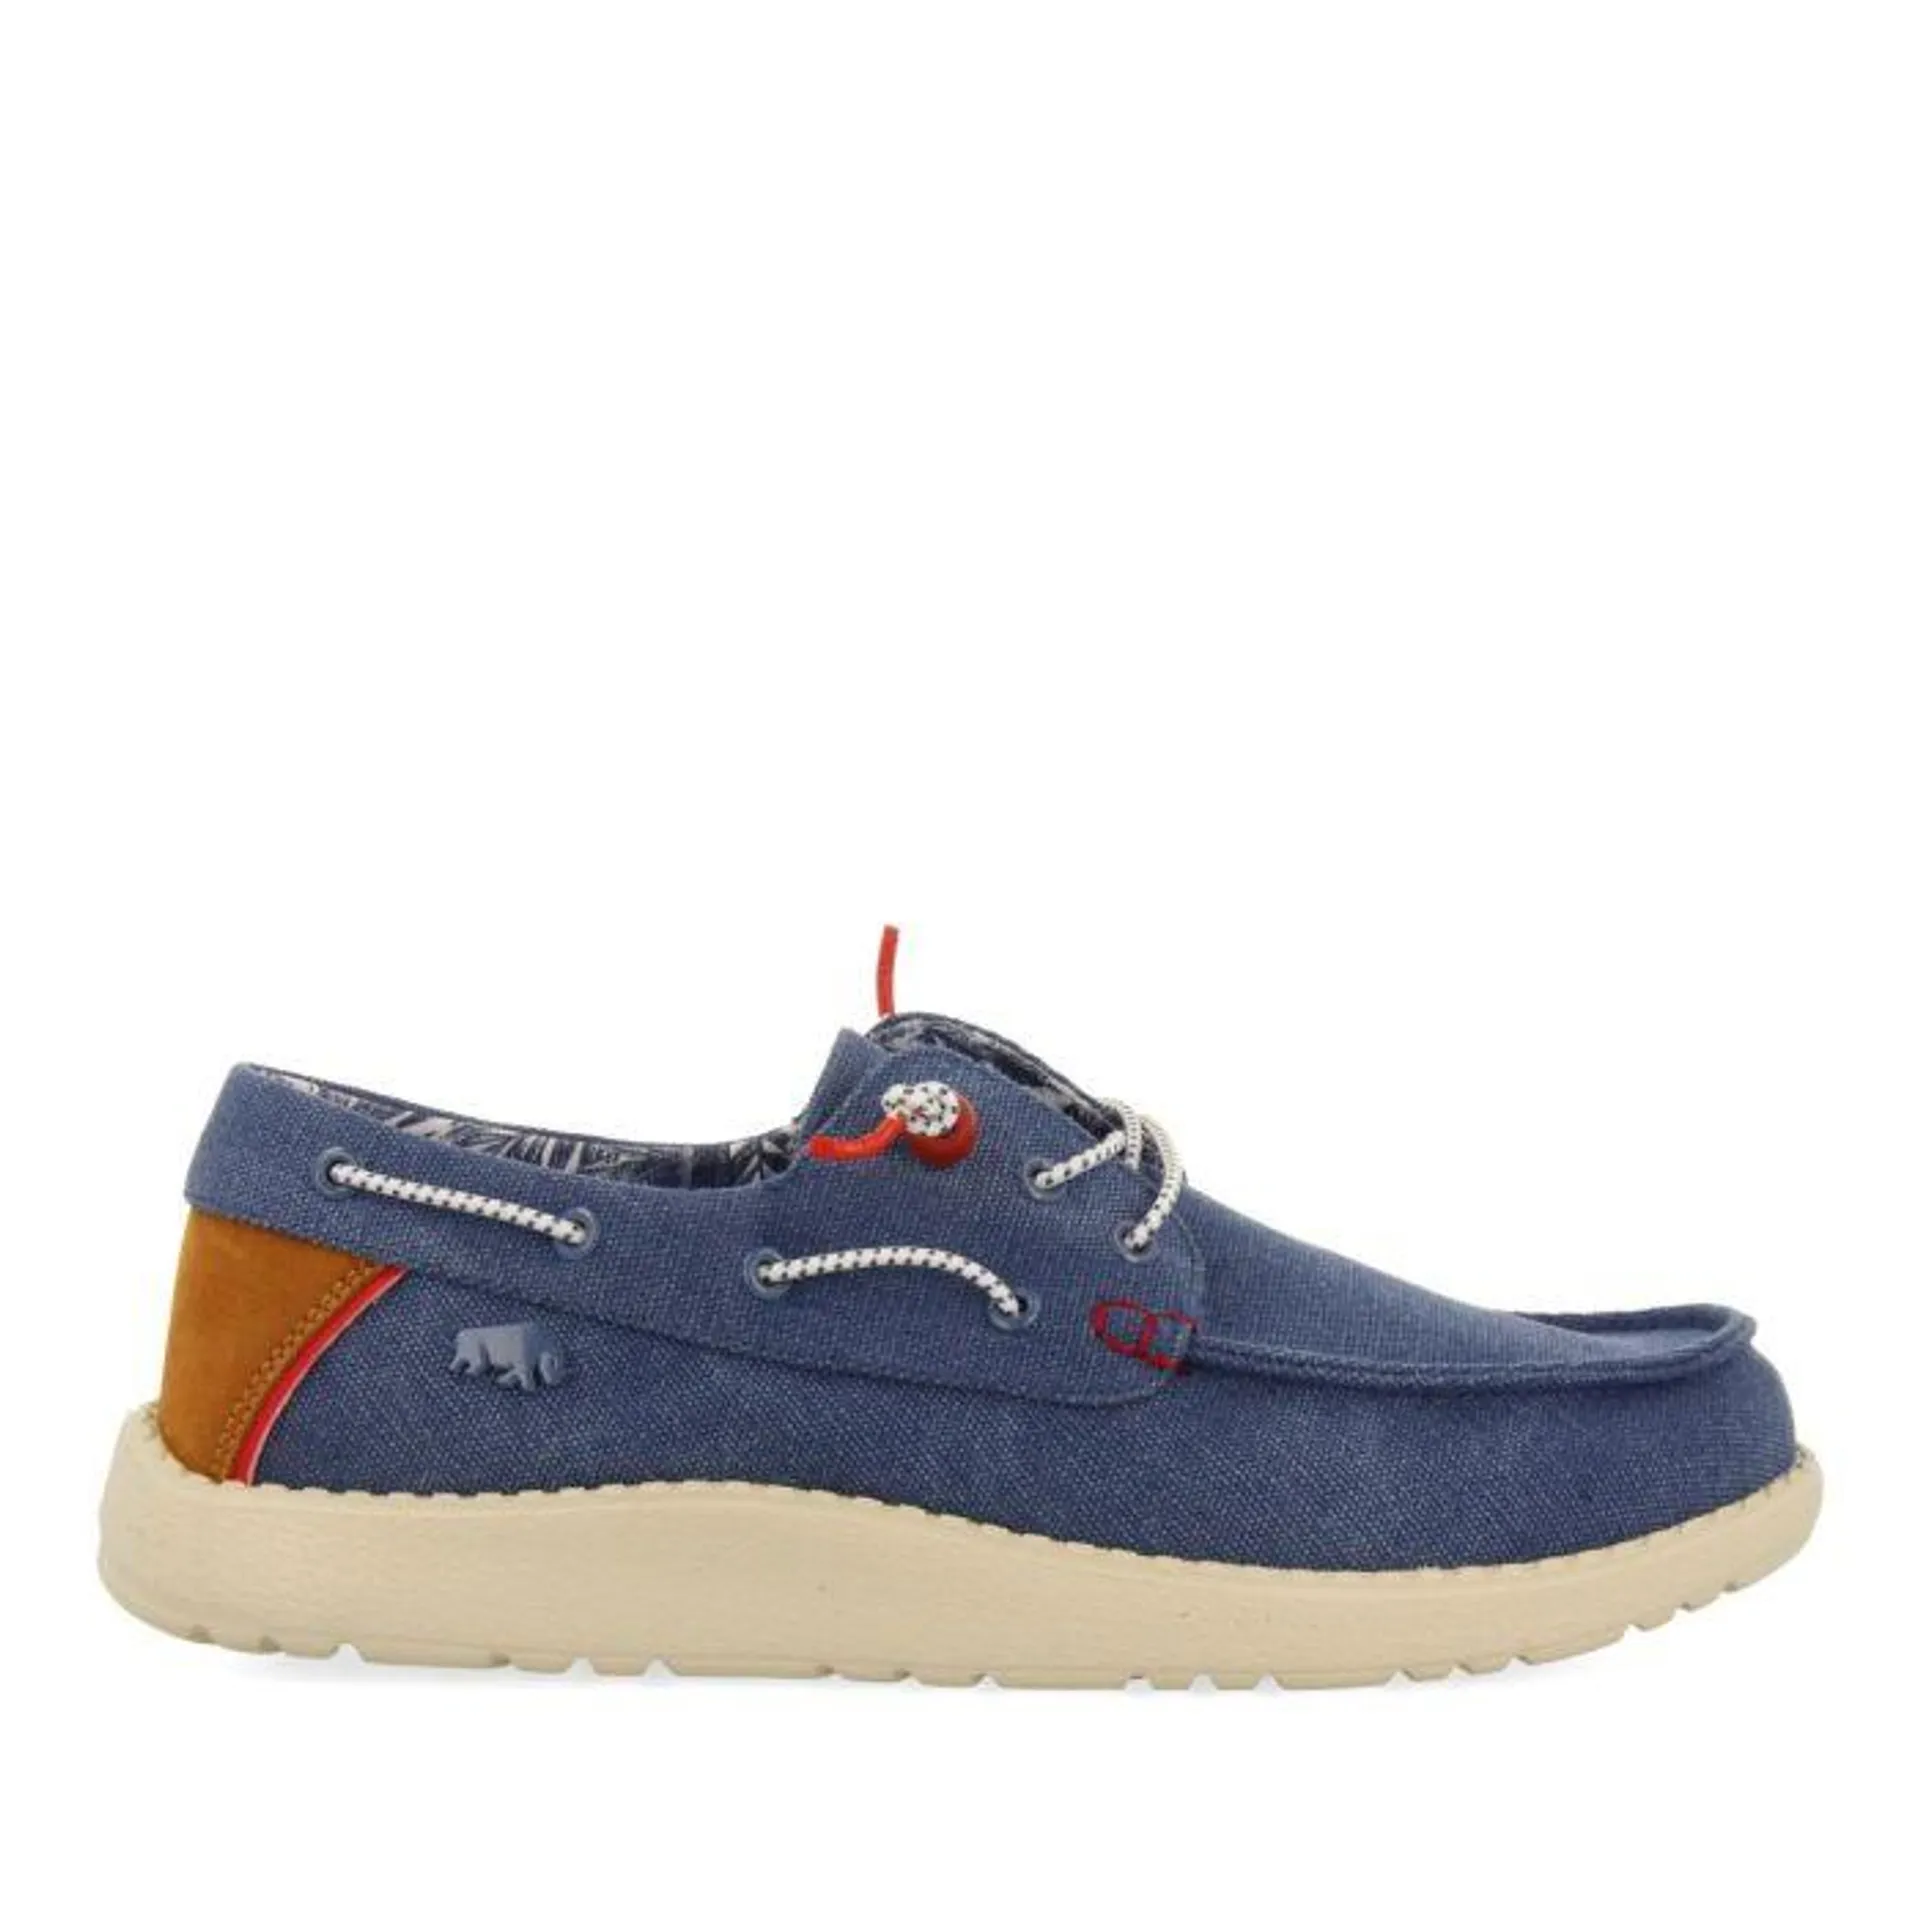 NAVY BLUE MOCCASINS NAUTICAL STYLE WITH COLOR DETAILS FOR MEN SULT